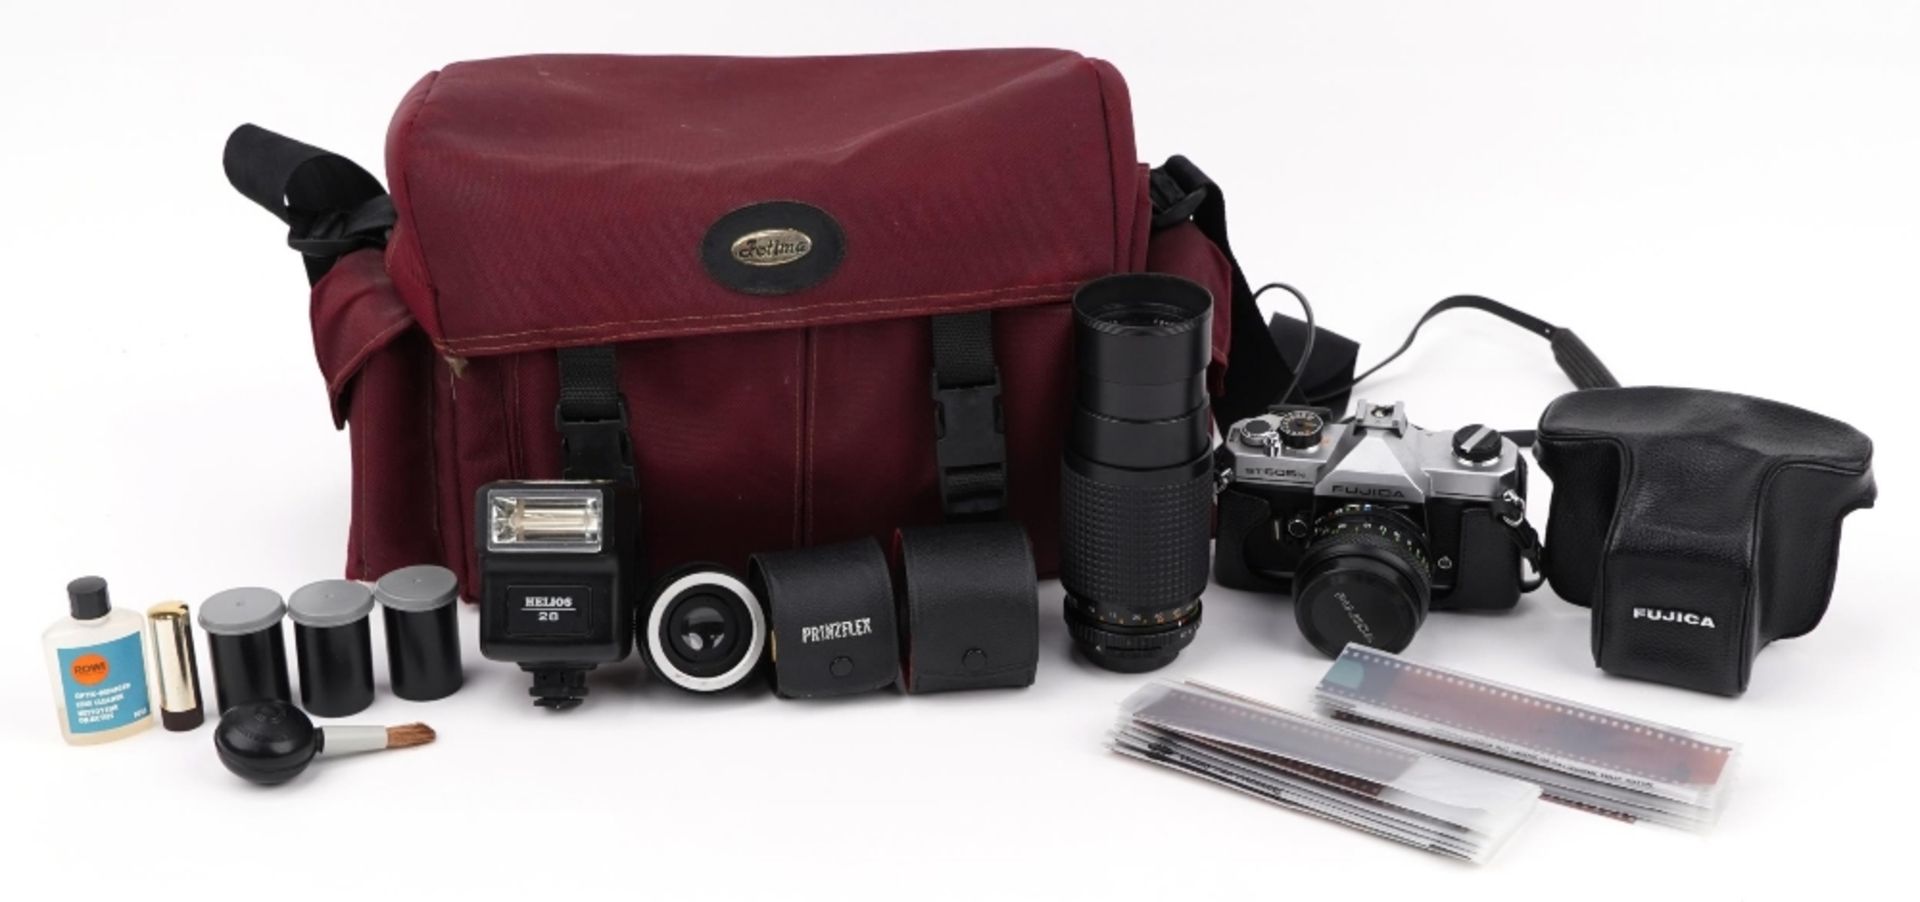 Fujica ST 605N SLR camera with 55mm lens, Osawa 80-205mm lens, accessories and carry bag : For